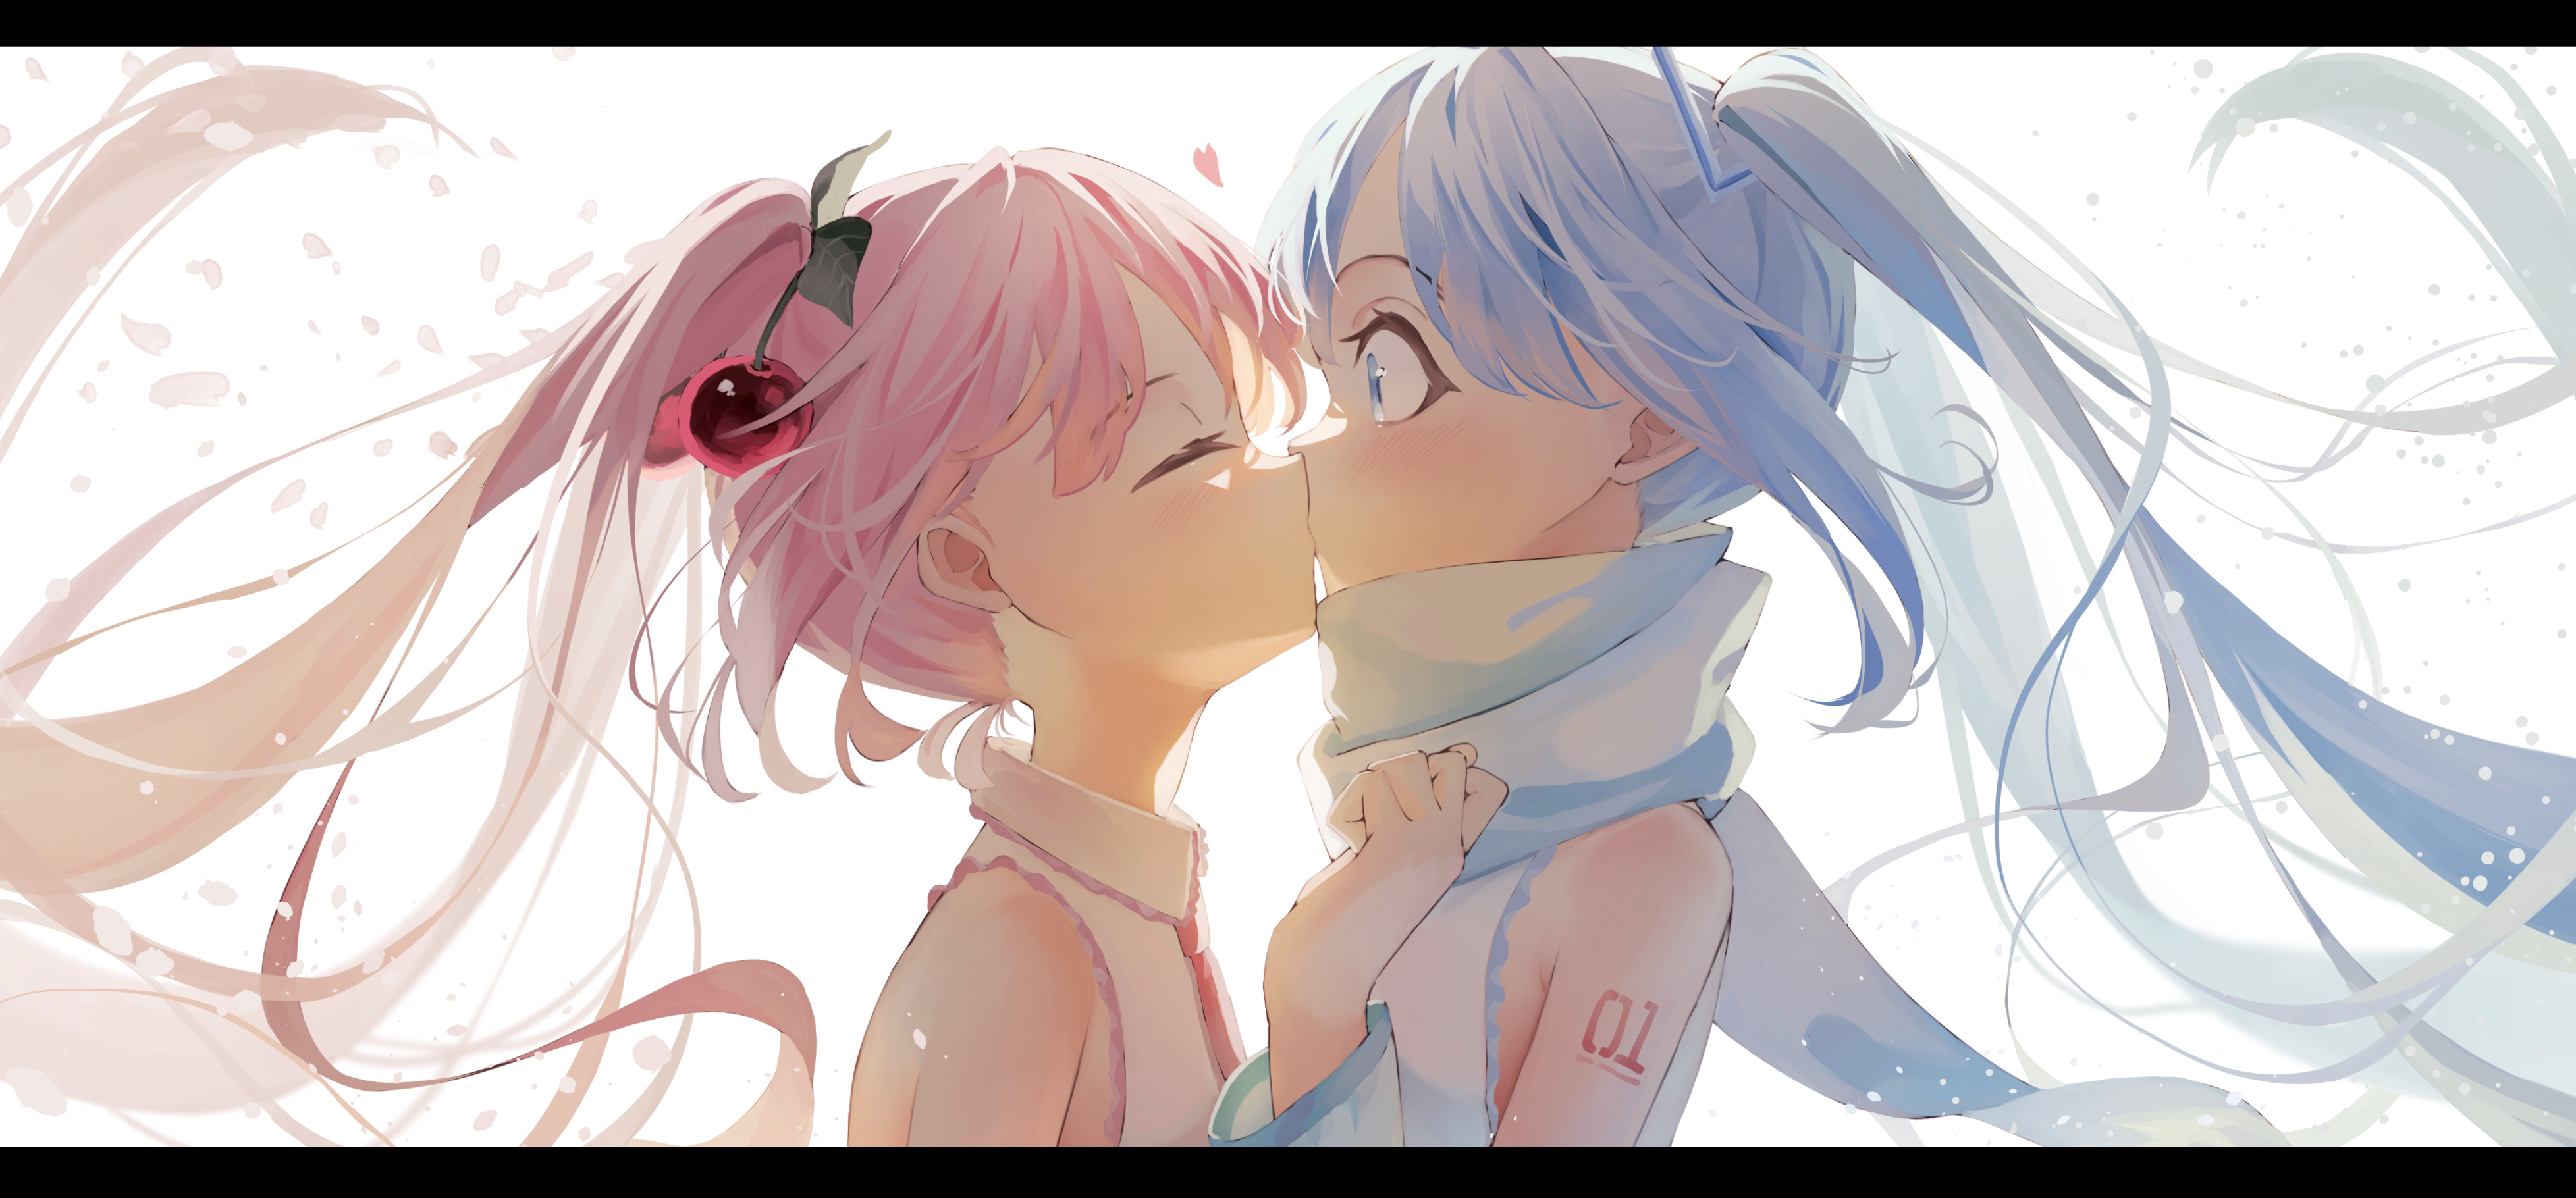 Anime 3912x1820 anime anime girls women kissing yuri surprised Vocaloid Hatsune Miku lesbians closed eyes long hair scarf petals heart blue hair pink hair white background simple background minimalism twintails